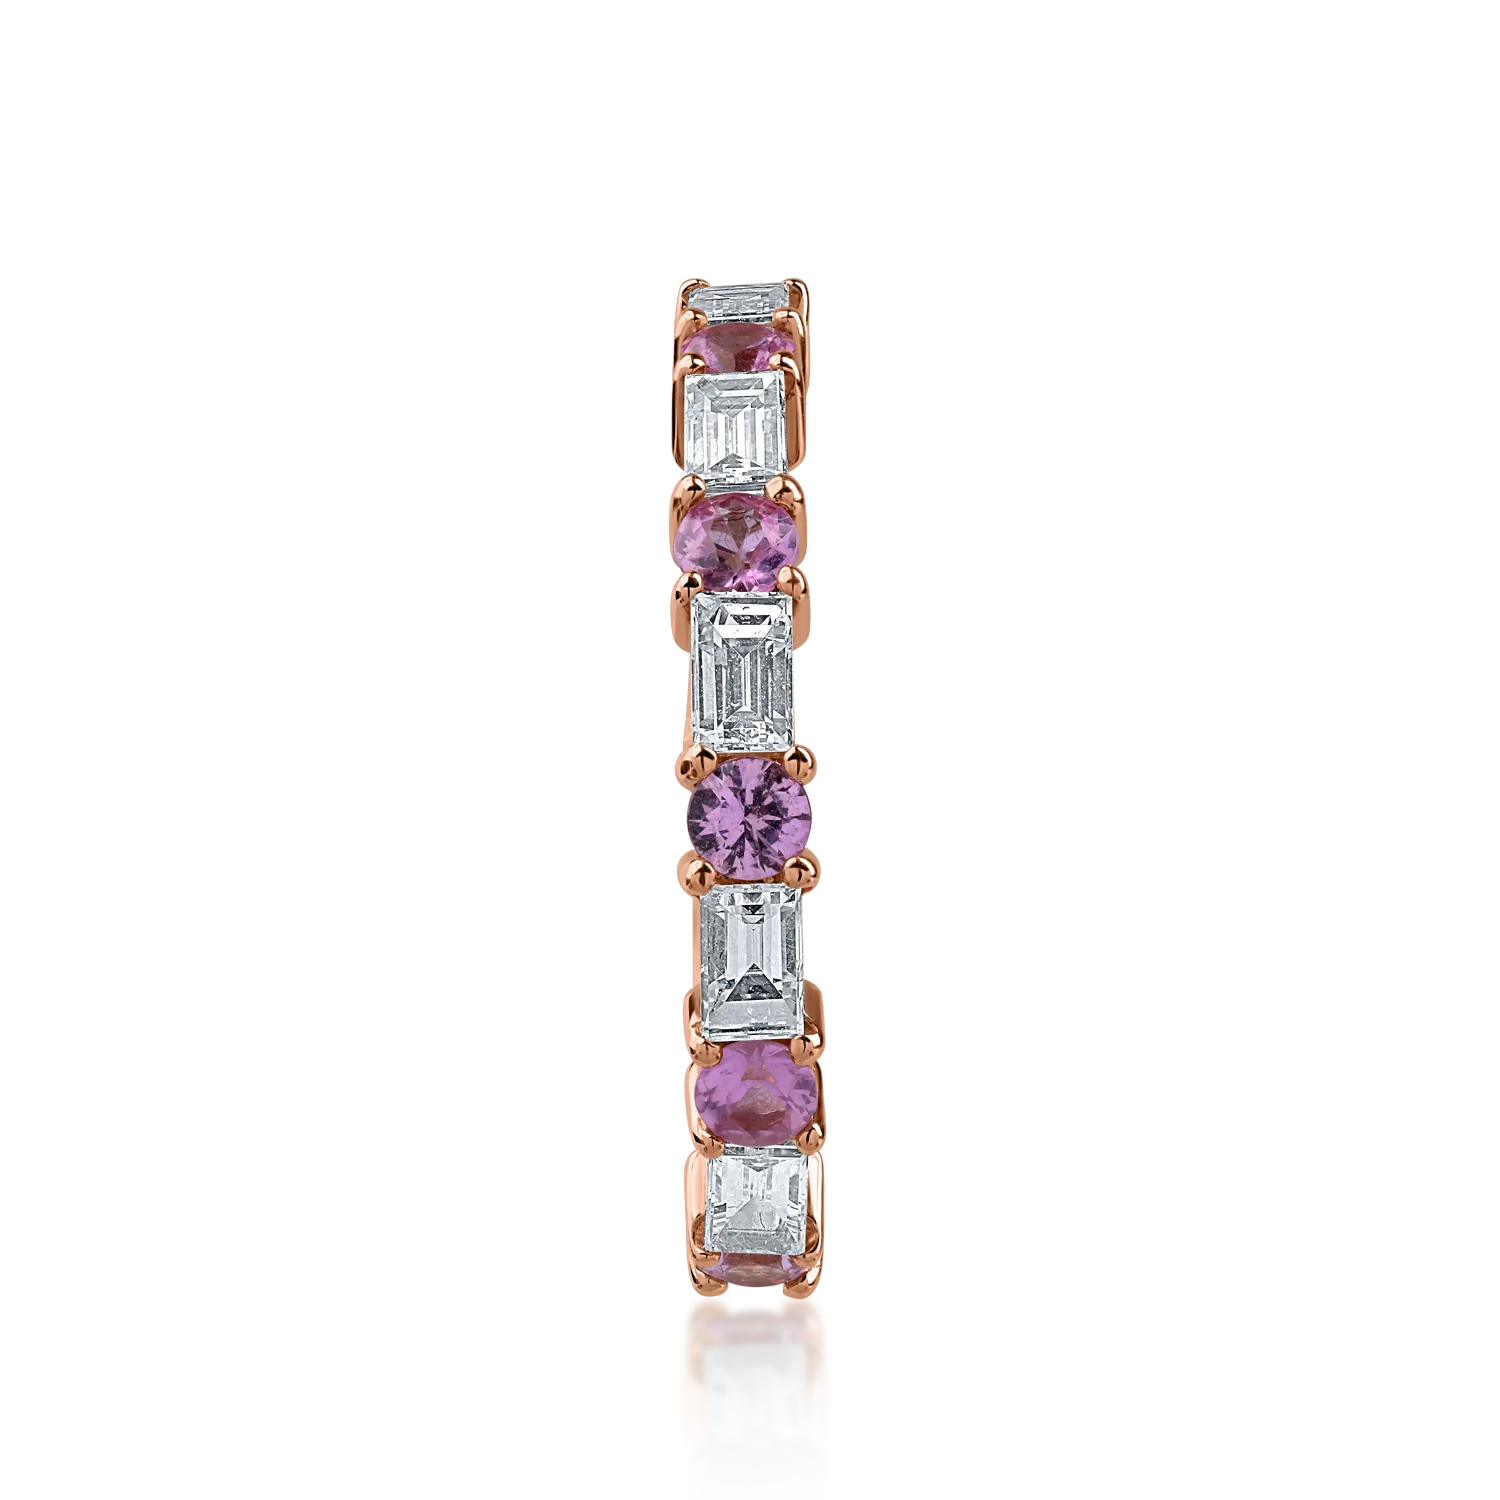 Half eternity ring in rose gold with 0.55ct diamonds and 0.43ct light-pink sapphires